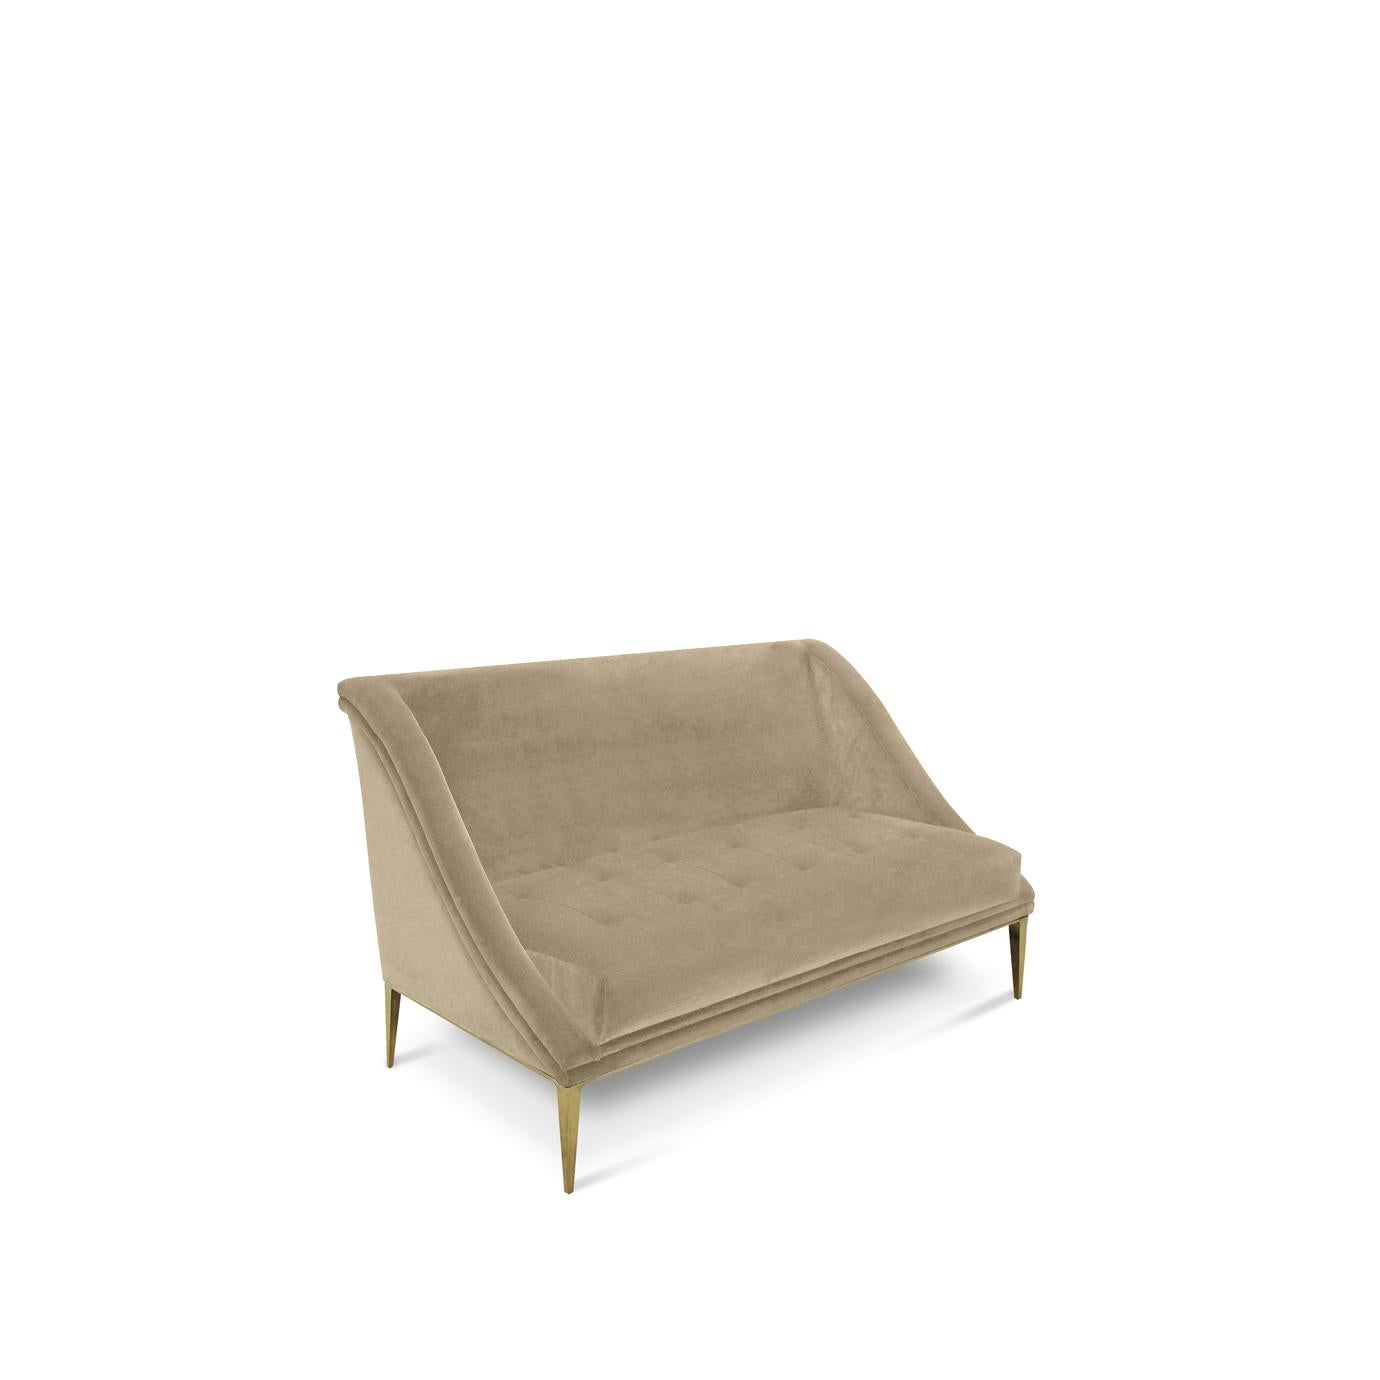 Designed to perform in a matter that indulges the eyes, the Geisha‘s curves grace a room with the extravagance and poise of a Kyoto Geisha. This fully upholstered tight back sofa is wrapped with a chic metal band leading to modern and sleek metal